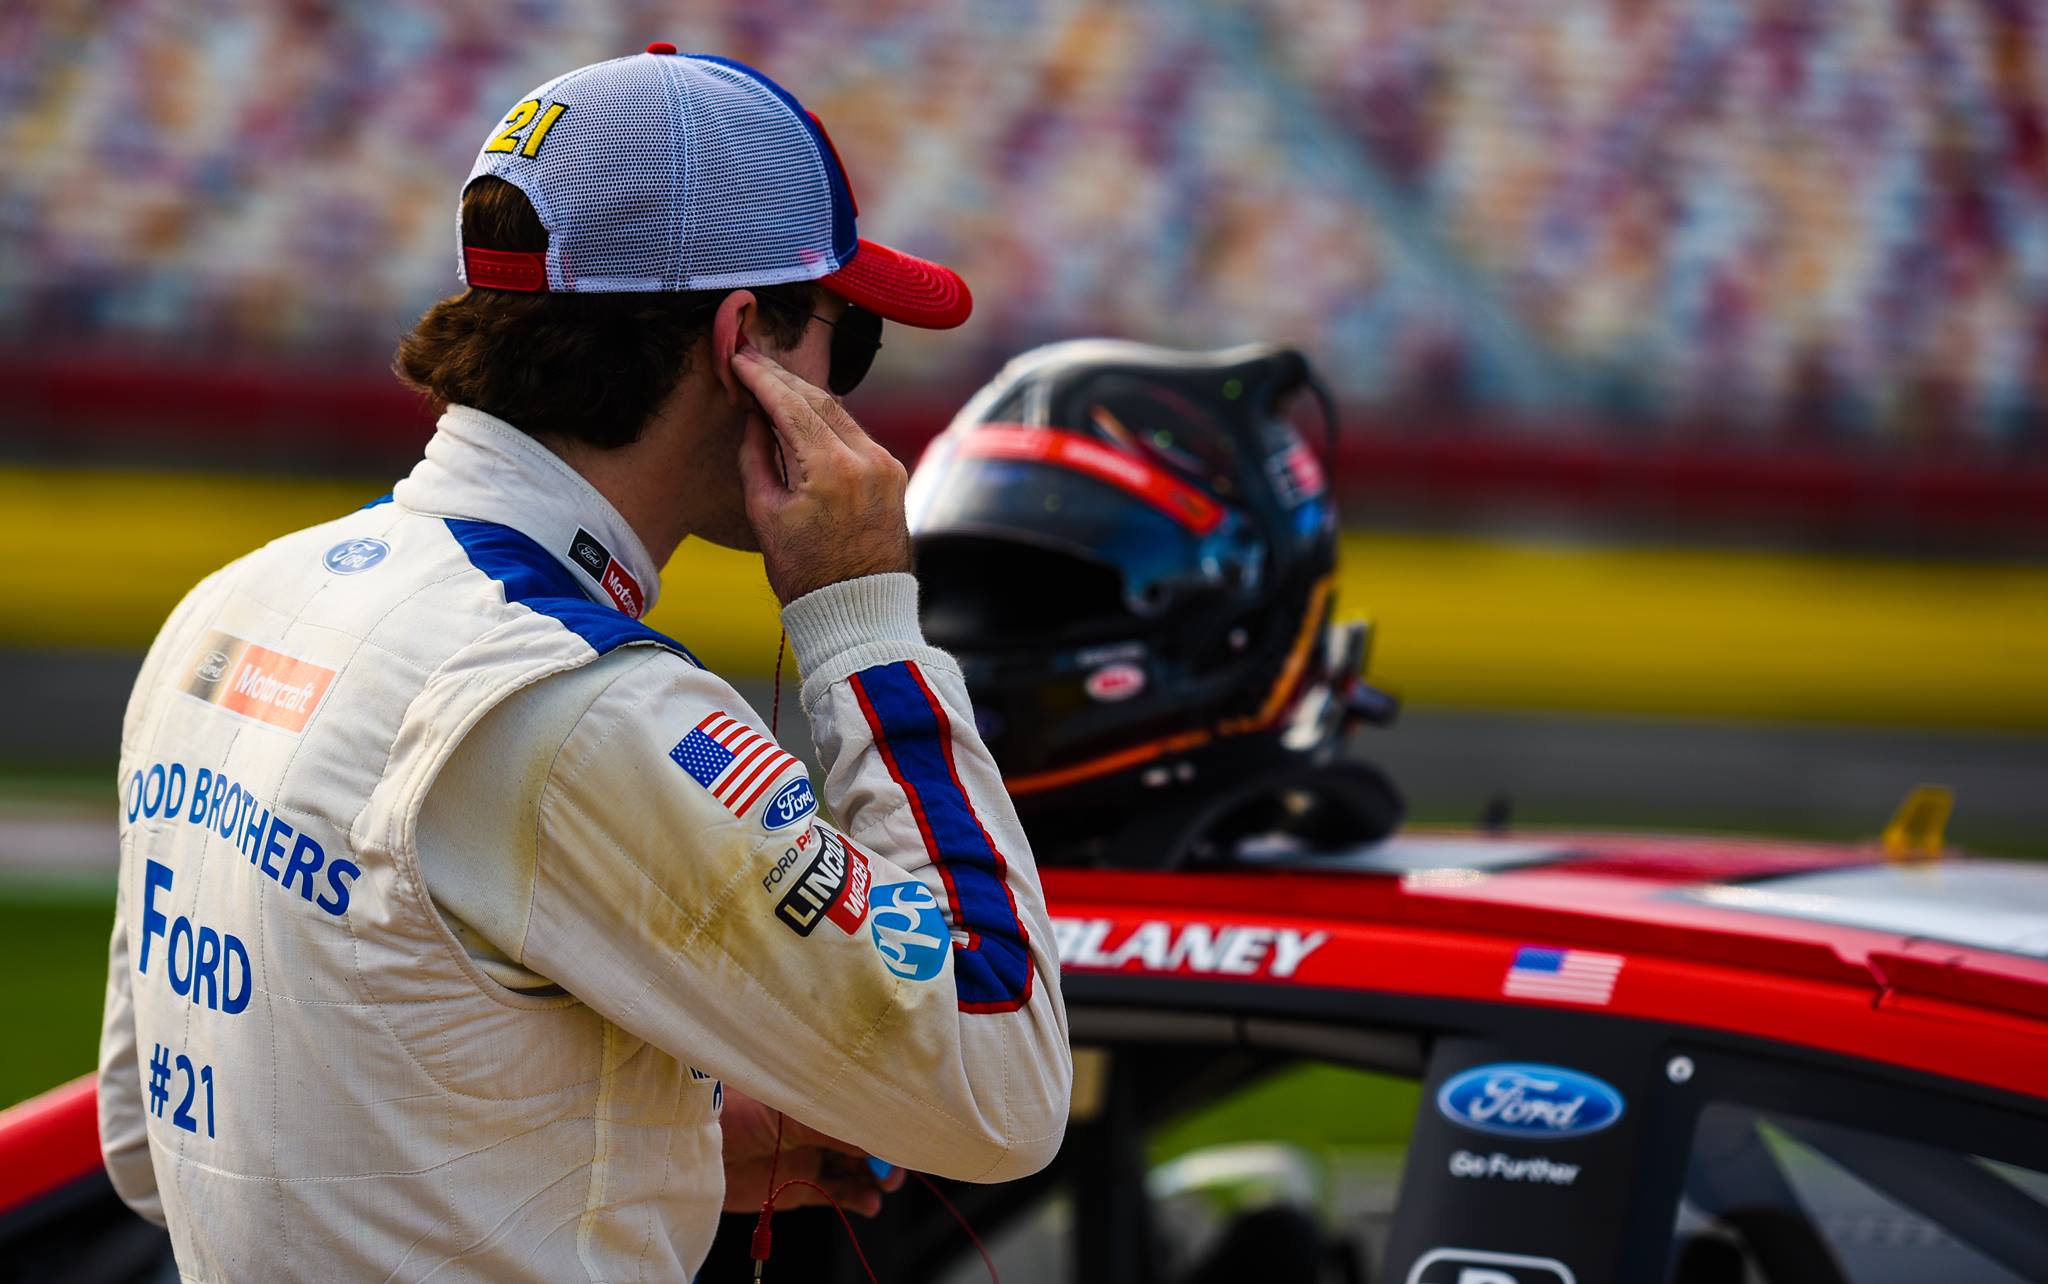 "I was brought up with the belief that in order to get respect, you’ve got to give respect." - Ryan Blaney (Photo Credit: Jeremy Thompson)